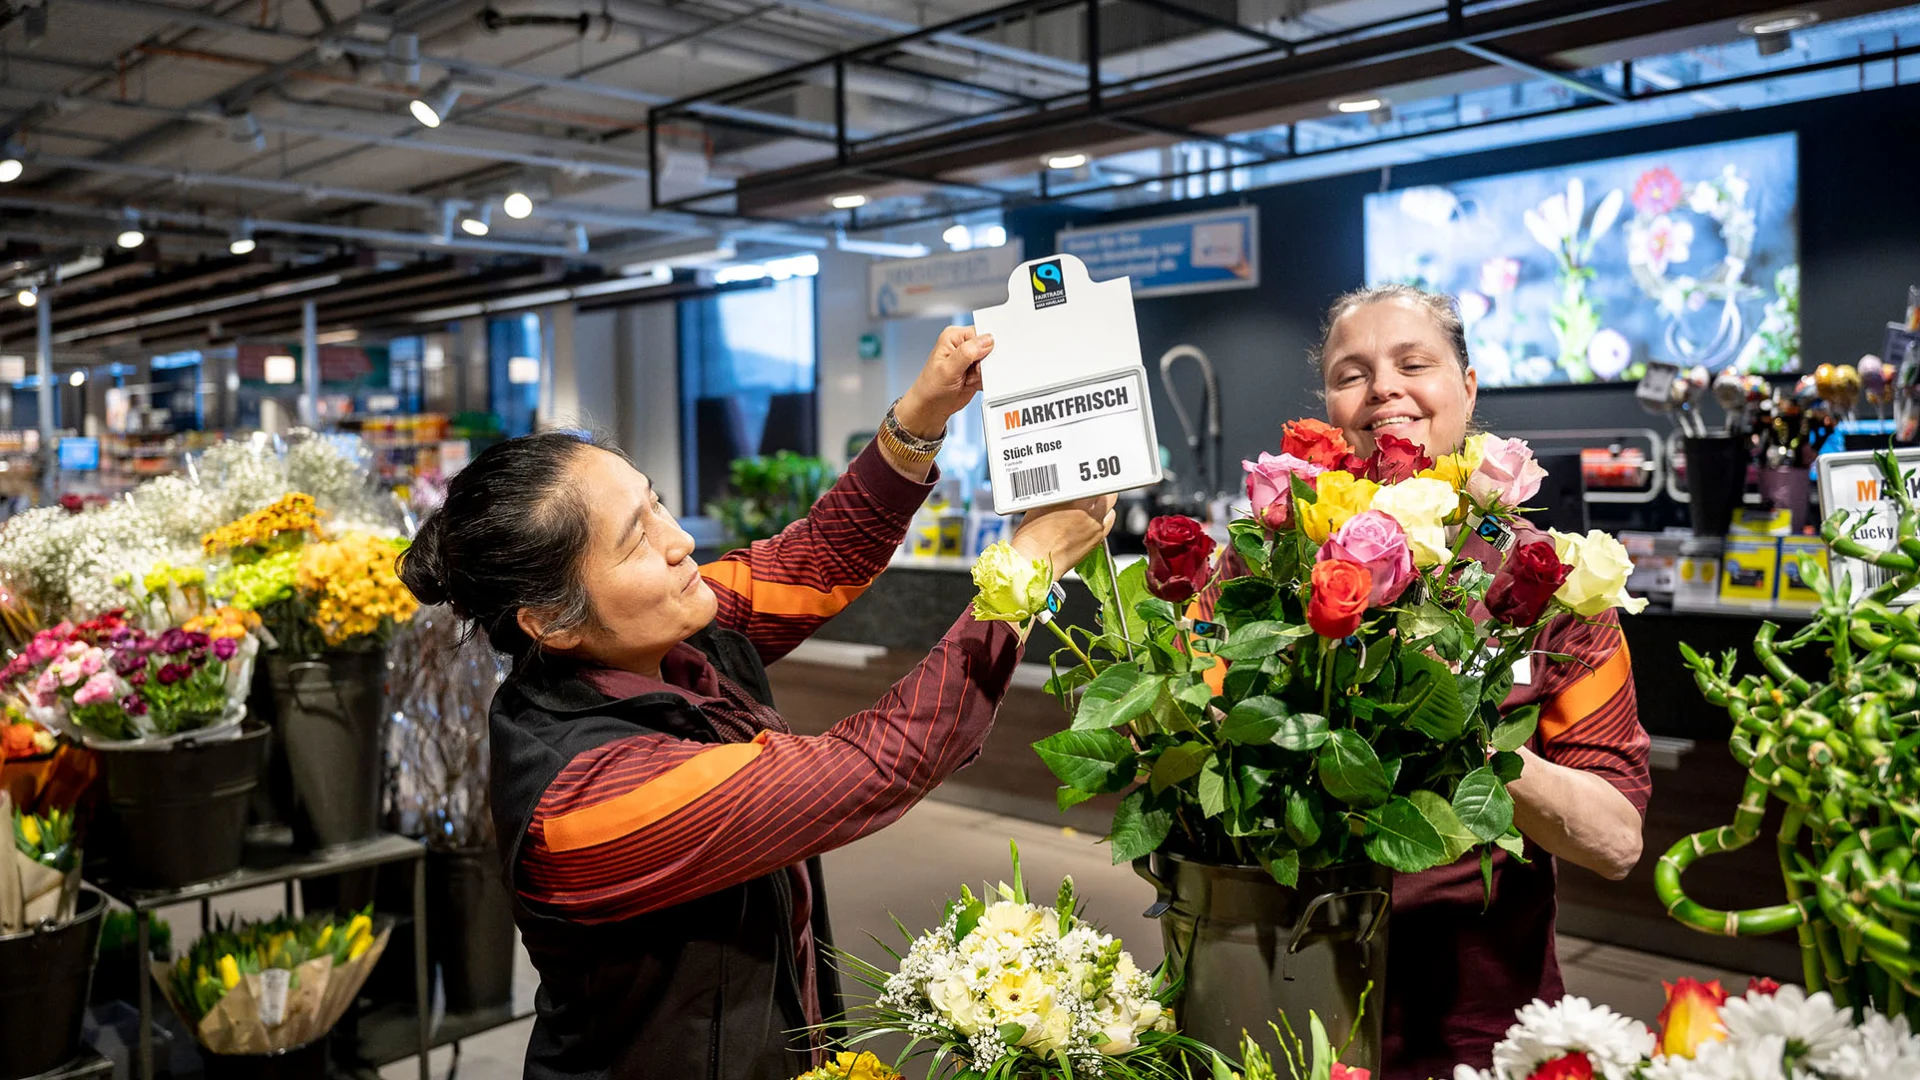 Two Migros employees put up a price board for Fairtrade roses.